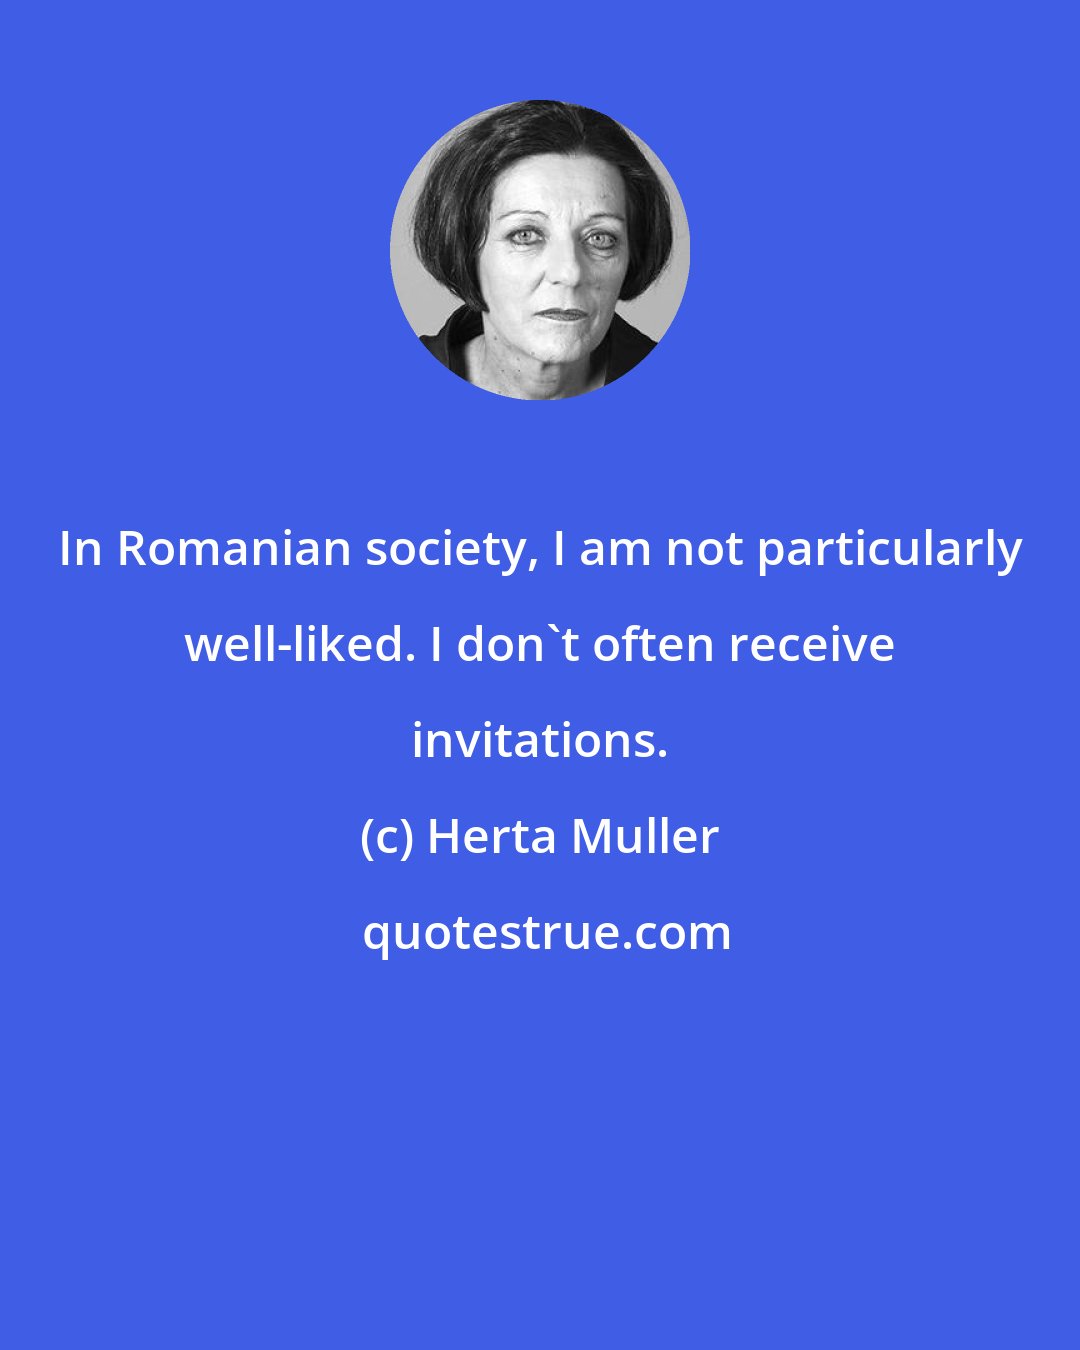 Herta Muller: In Romanian society, I am not particularly well-liked. I don't often receive invitations.